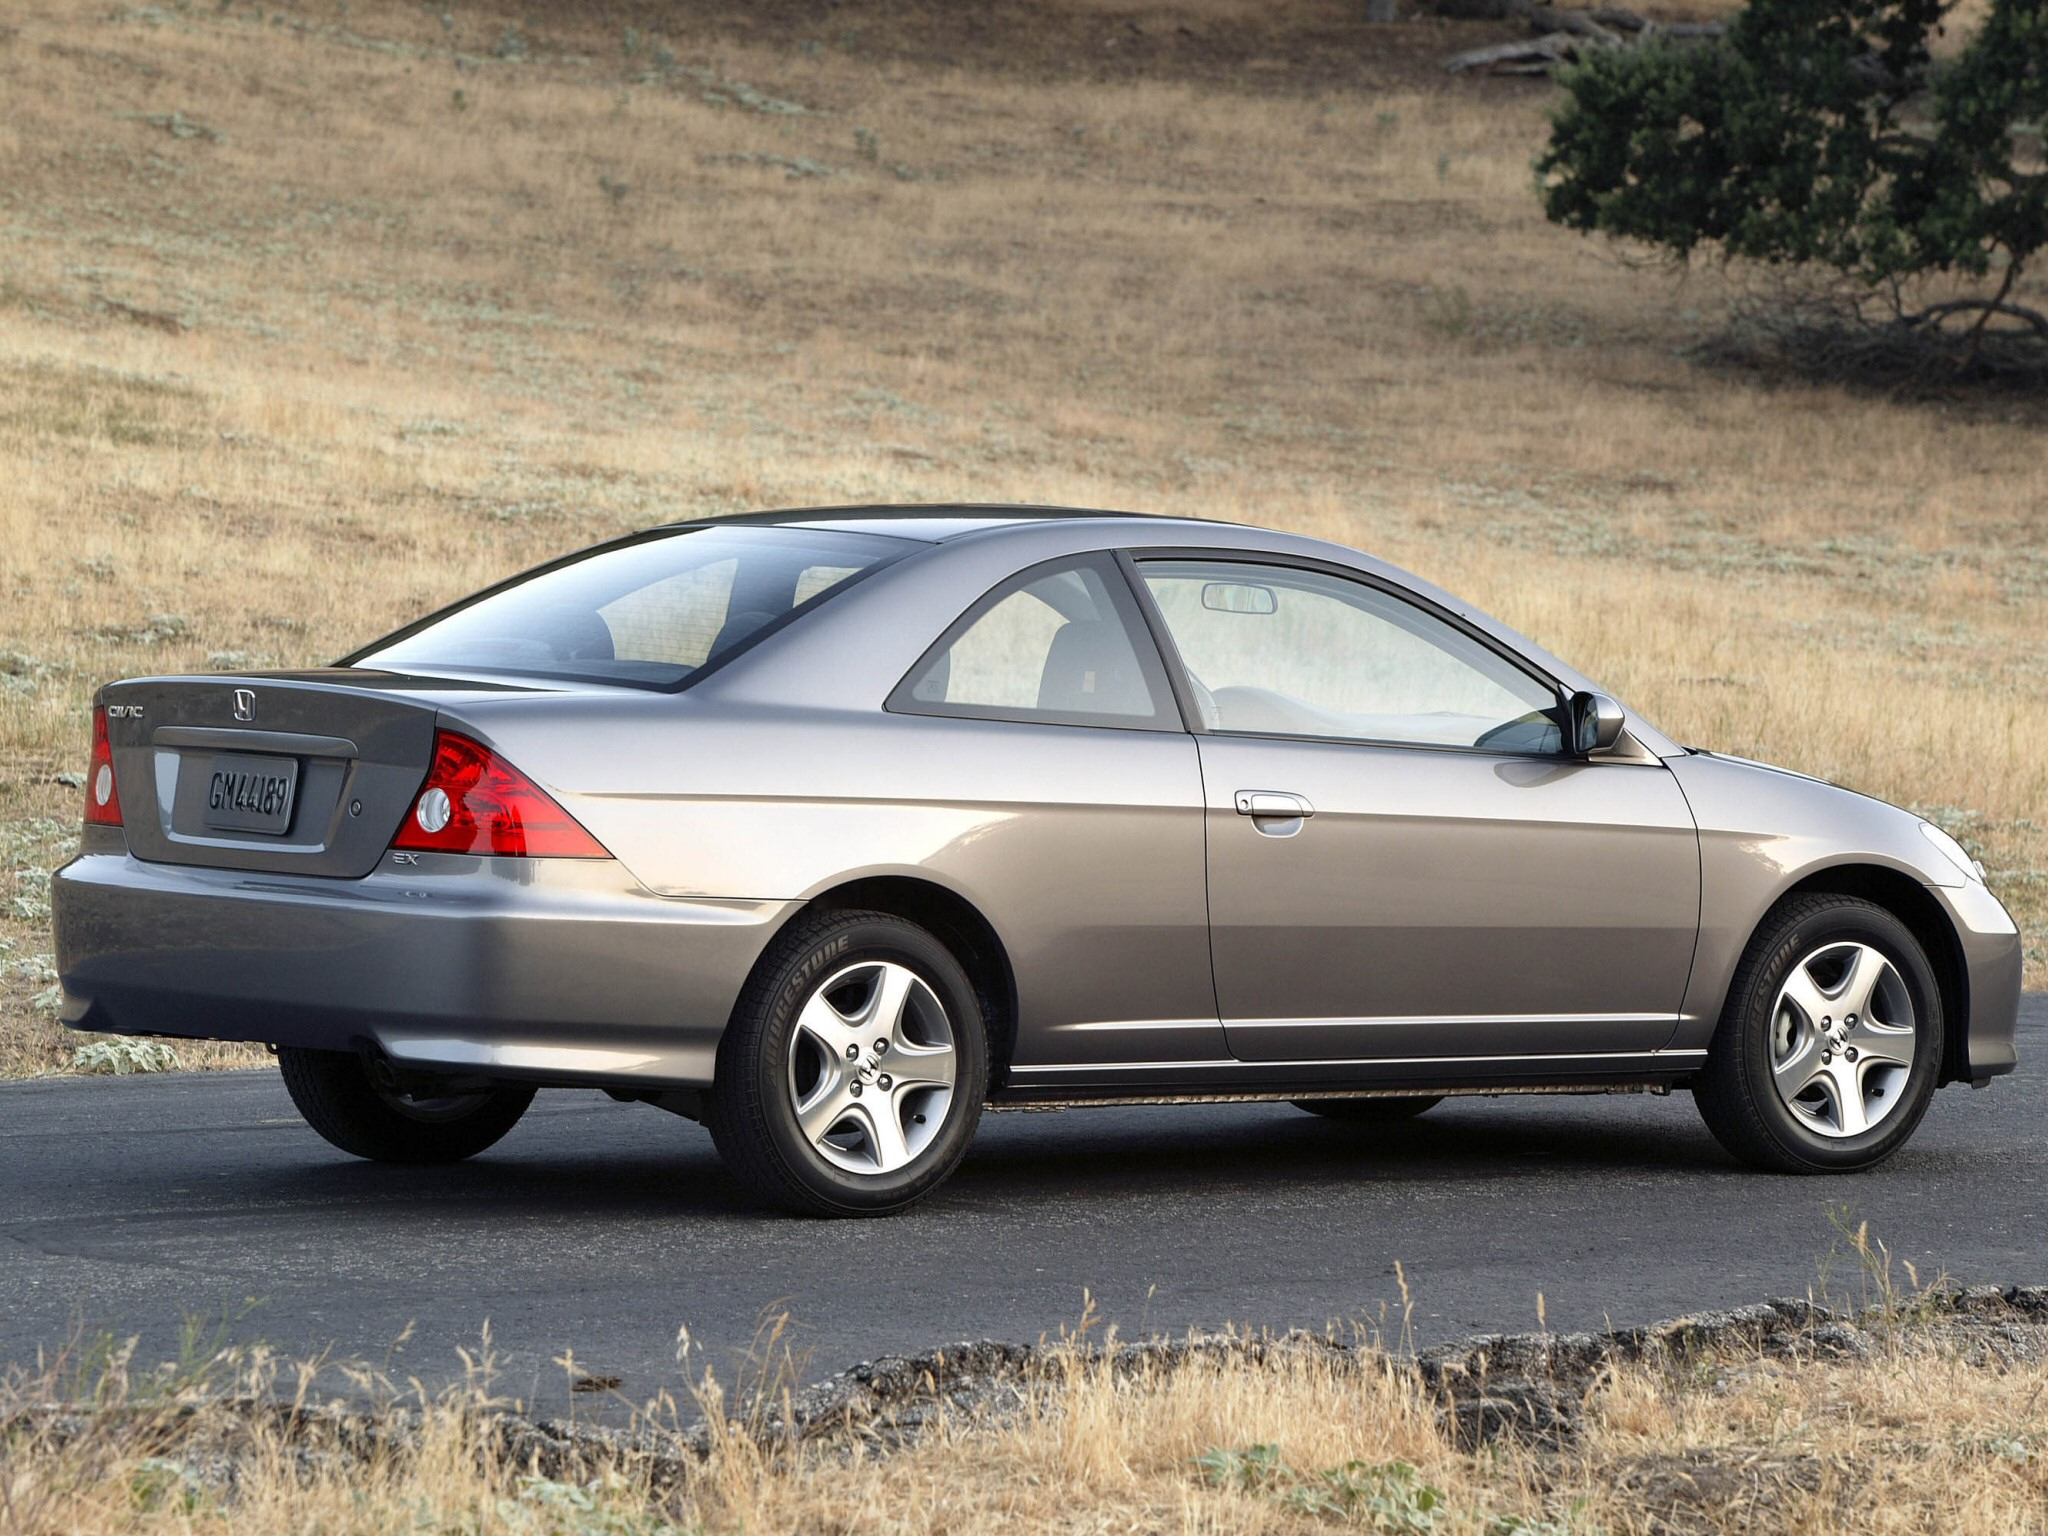 Car in pictures – car photo gallery » Honda Civic Coupe 2005 Photo 06